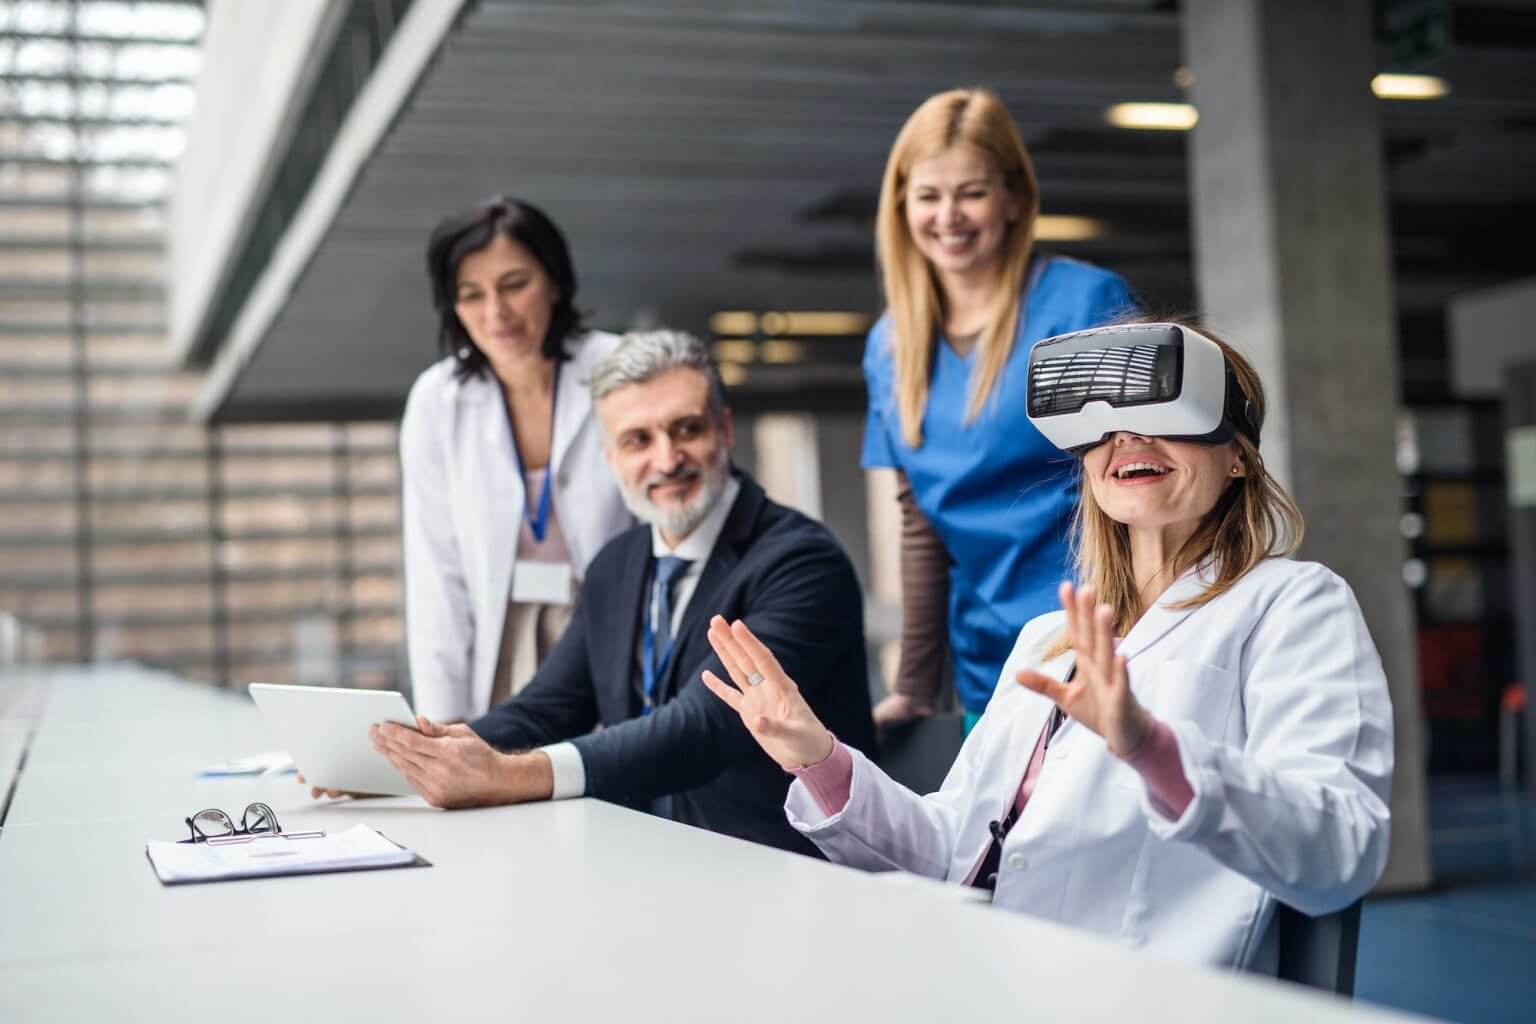 Empowering Healthcare Industry: How Virtual Reality Drives Business Progress